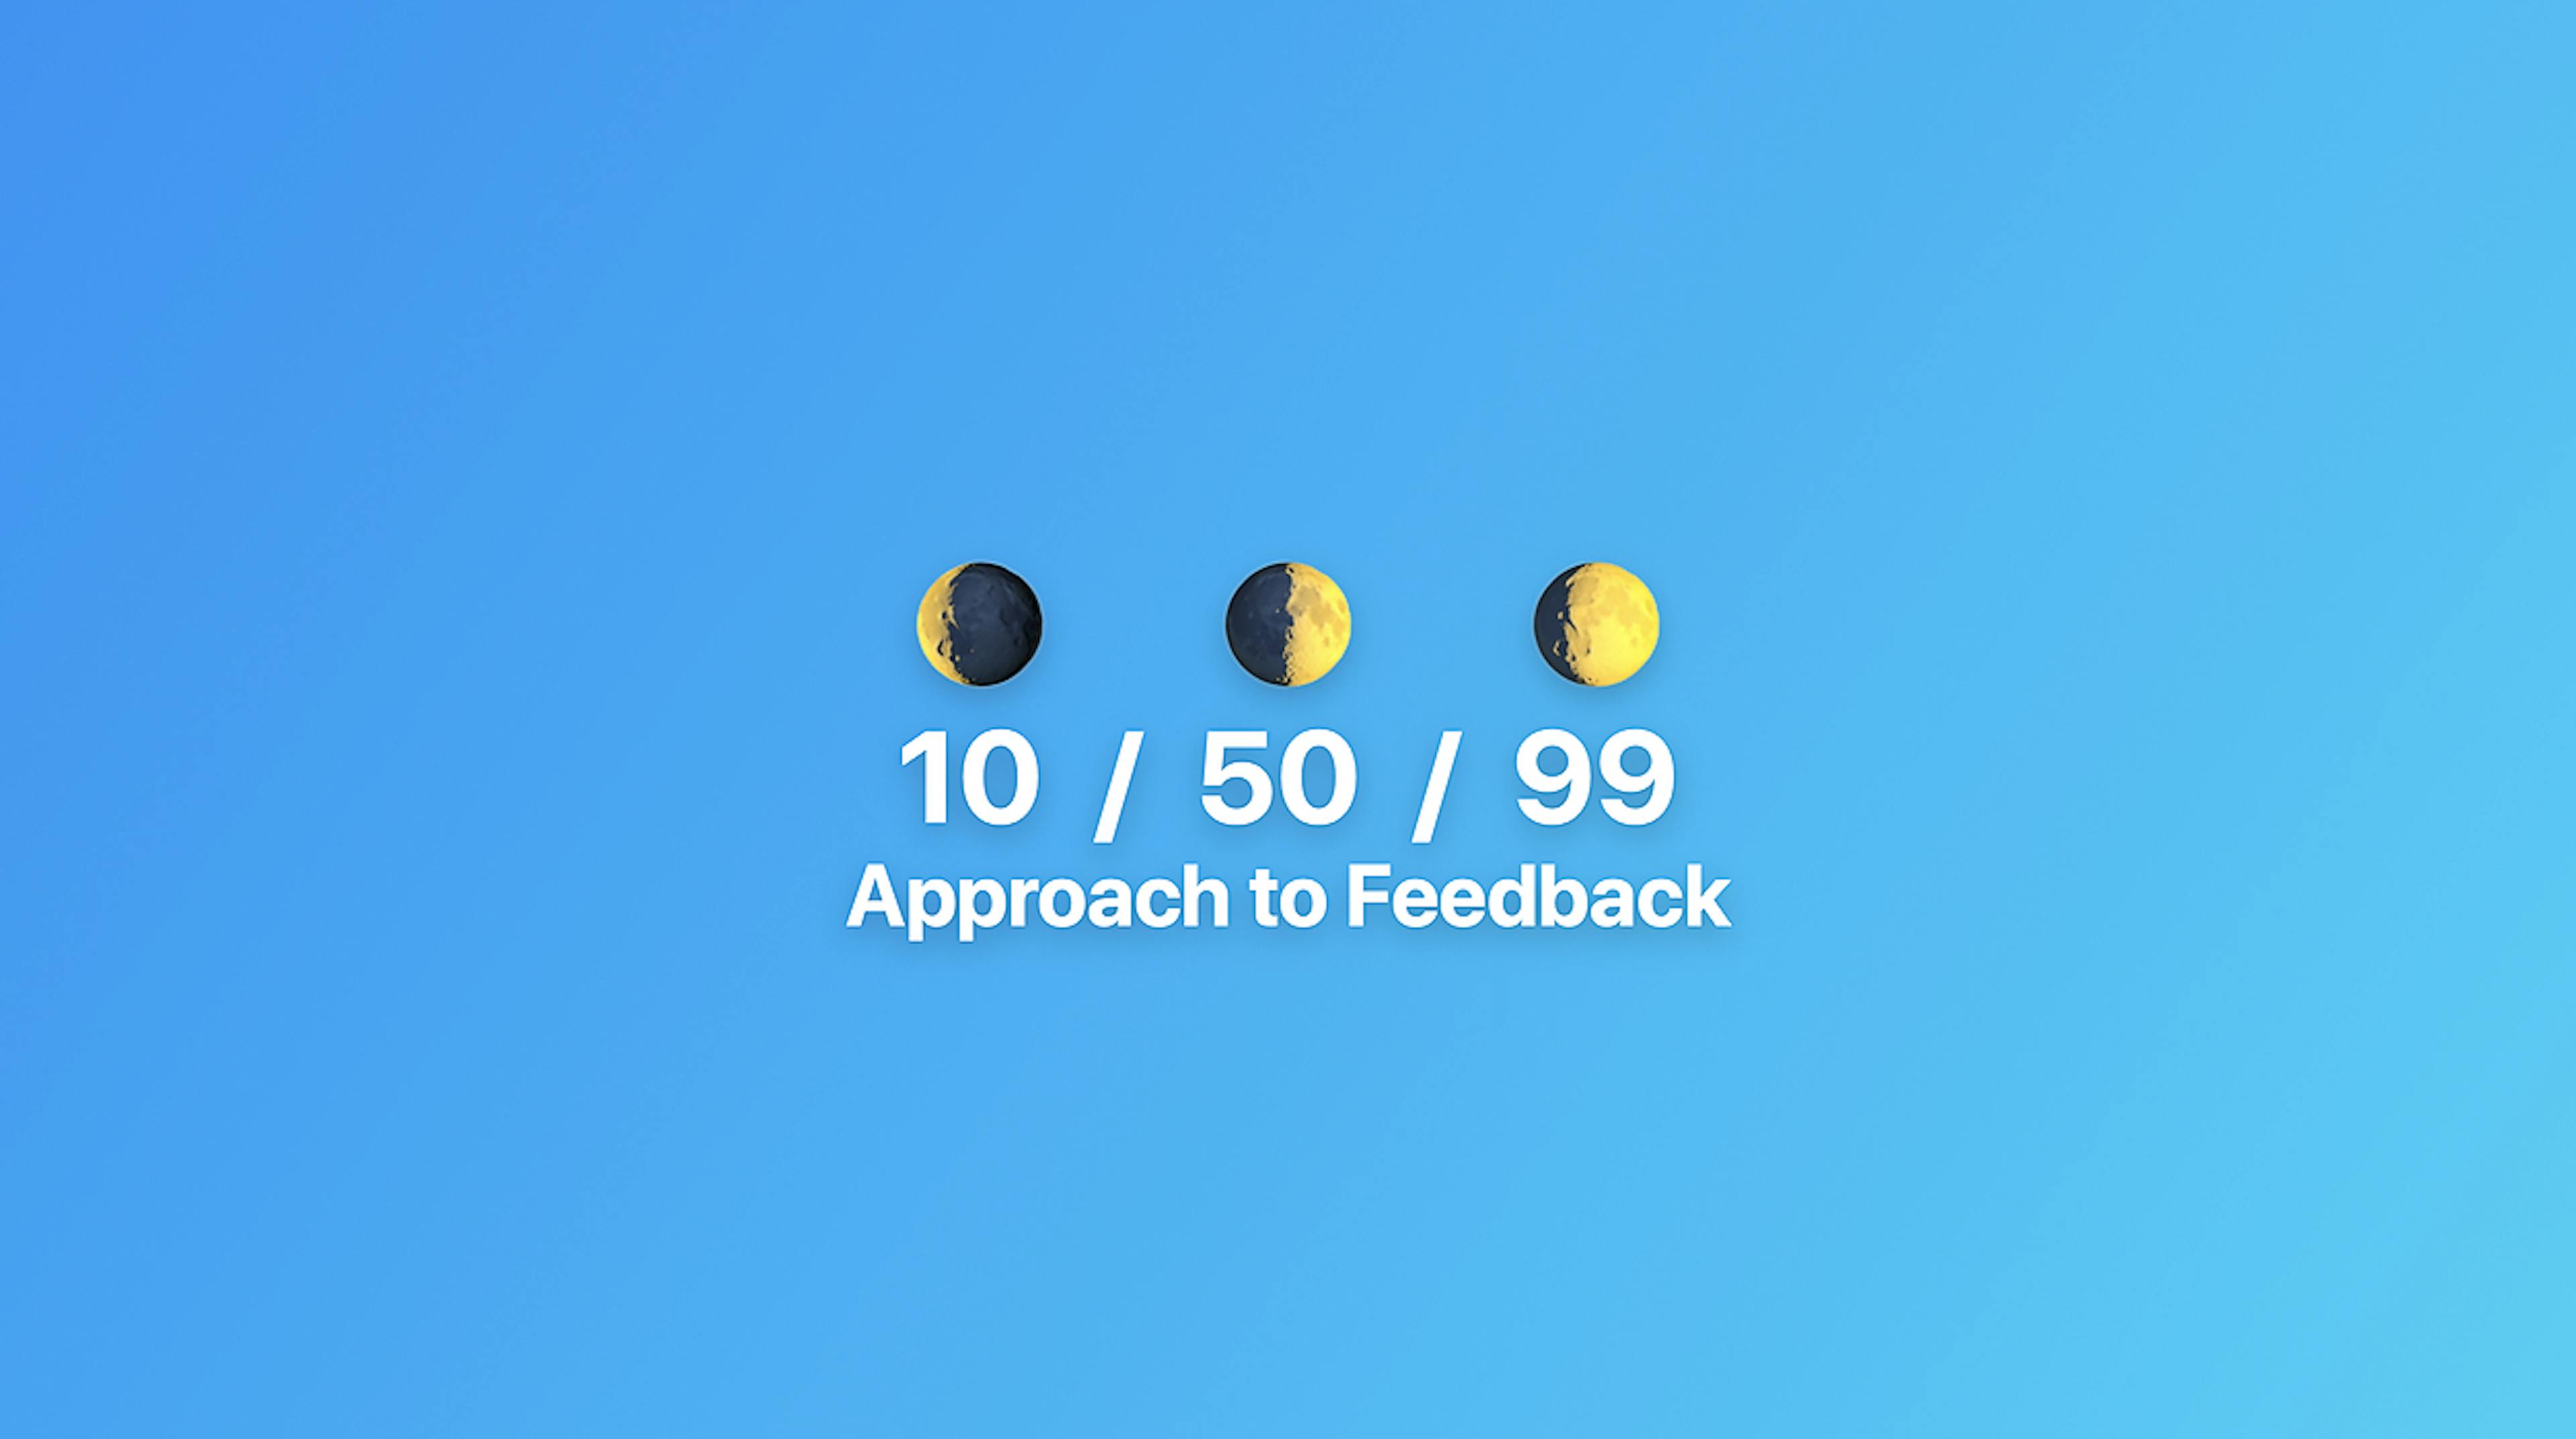 featured image - How To Use the "10/50/99" Approach to Give Feedback